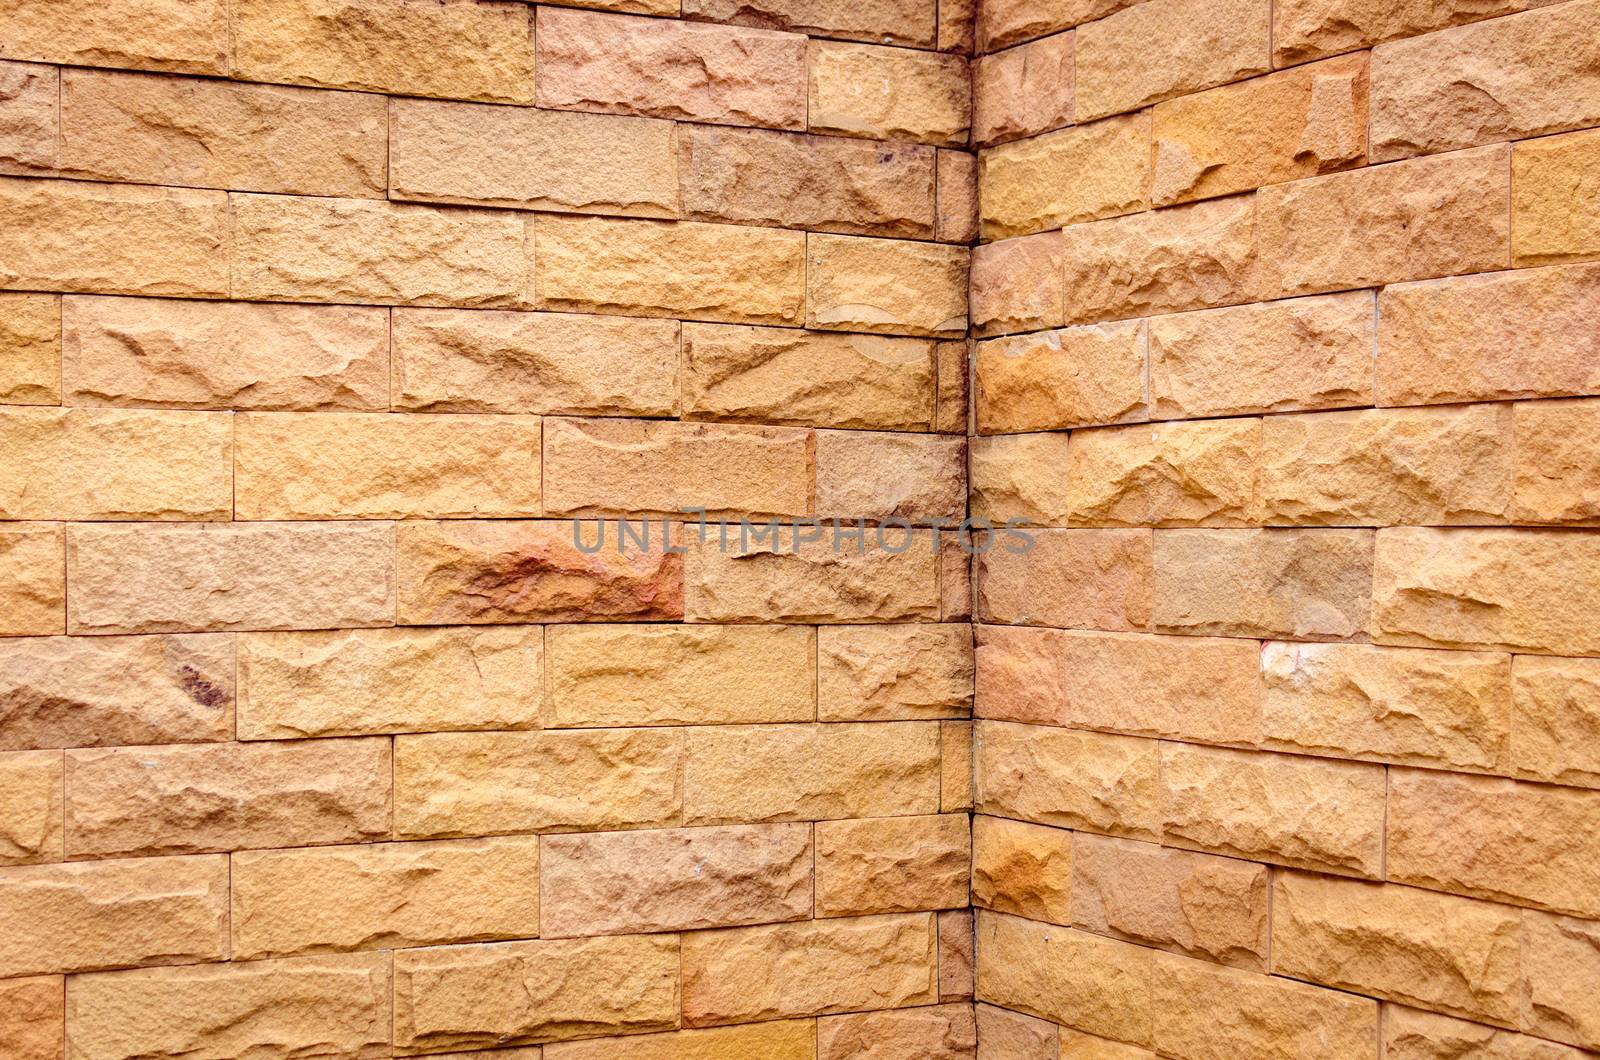 A brick wall in different natural orange tones